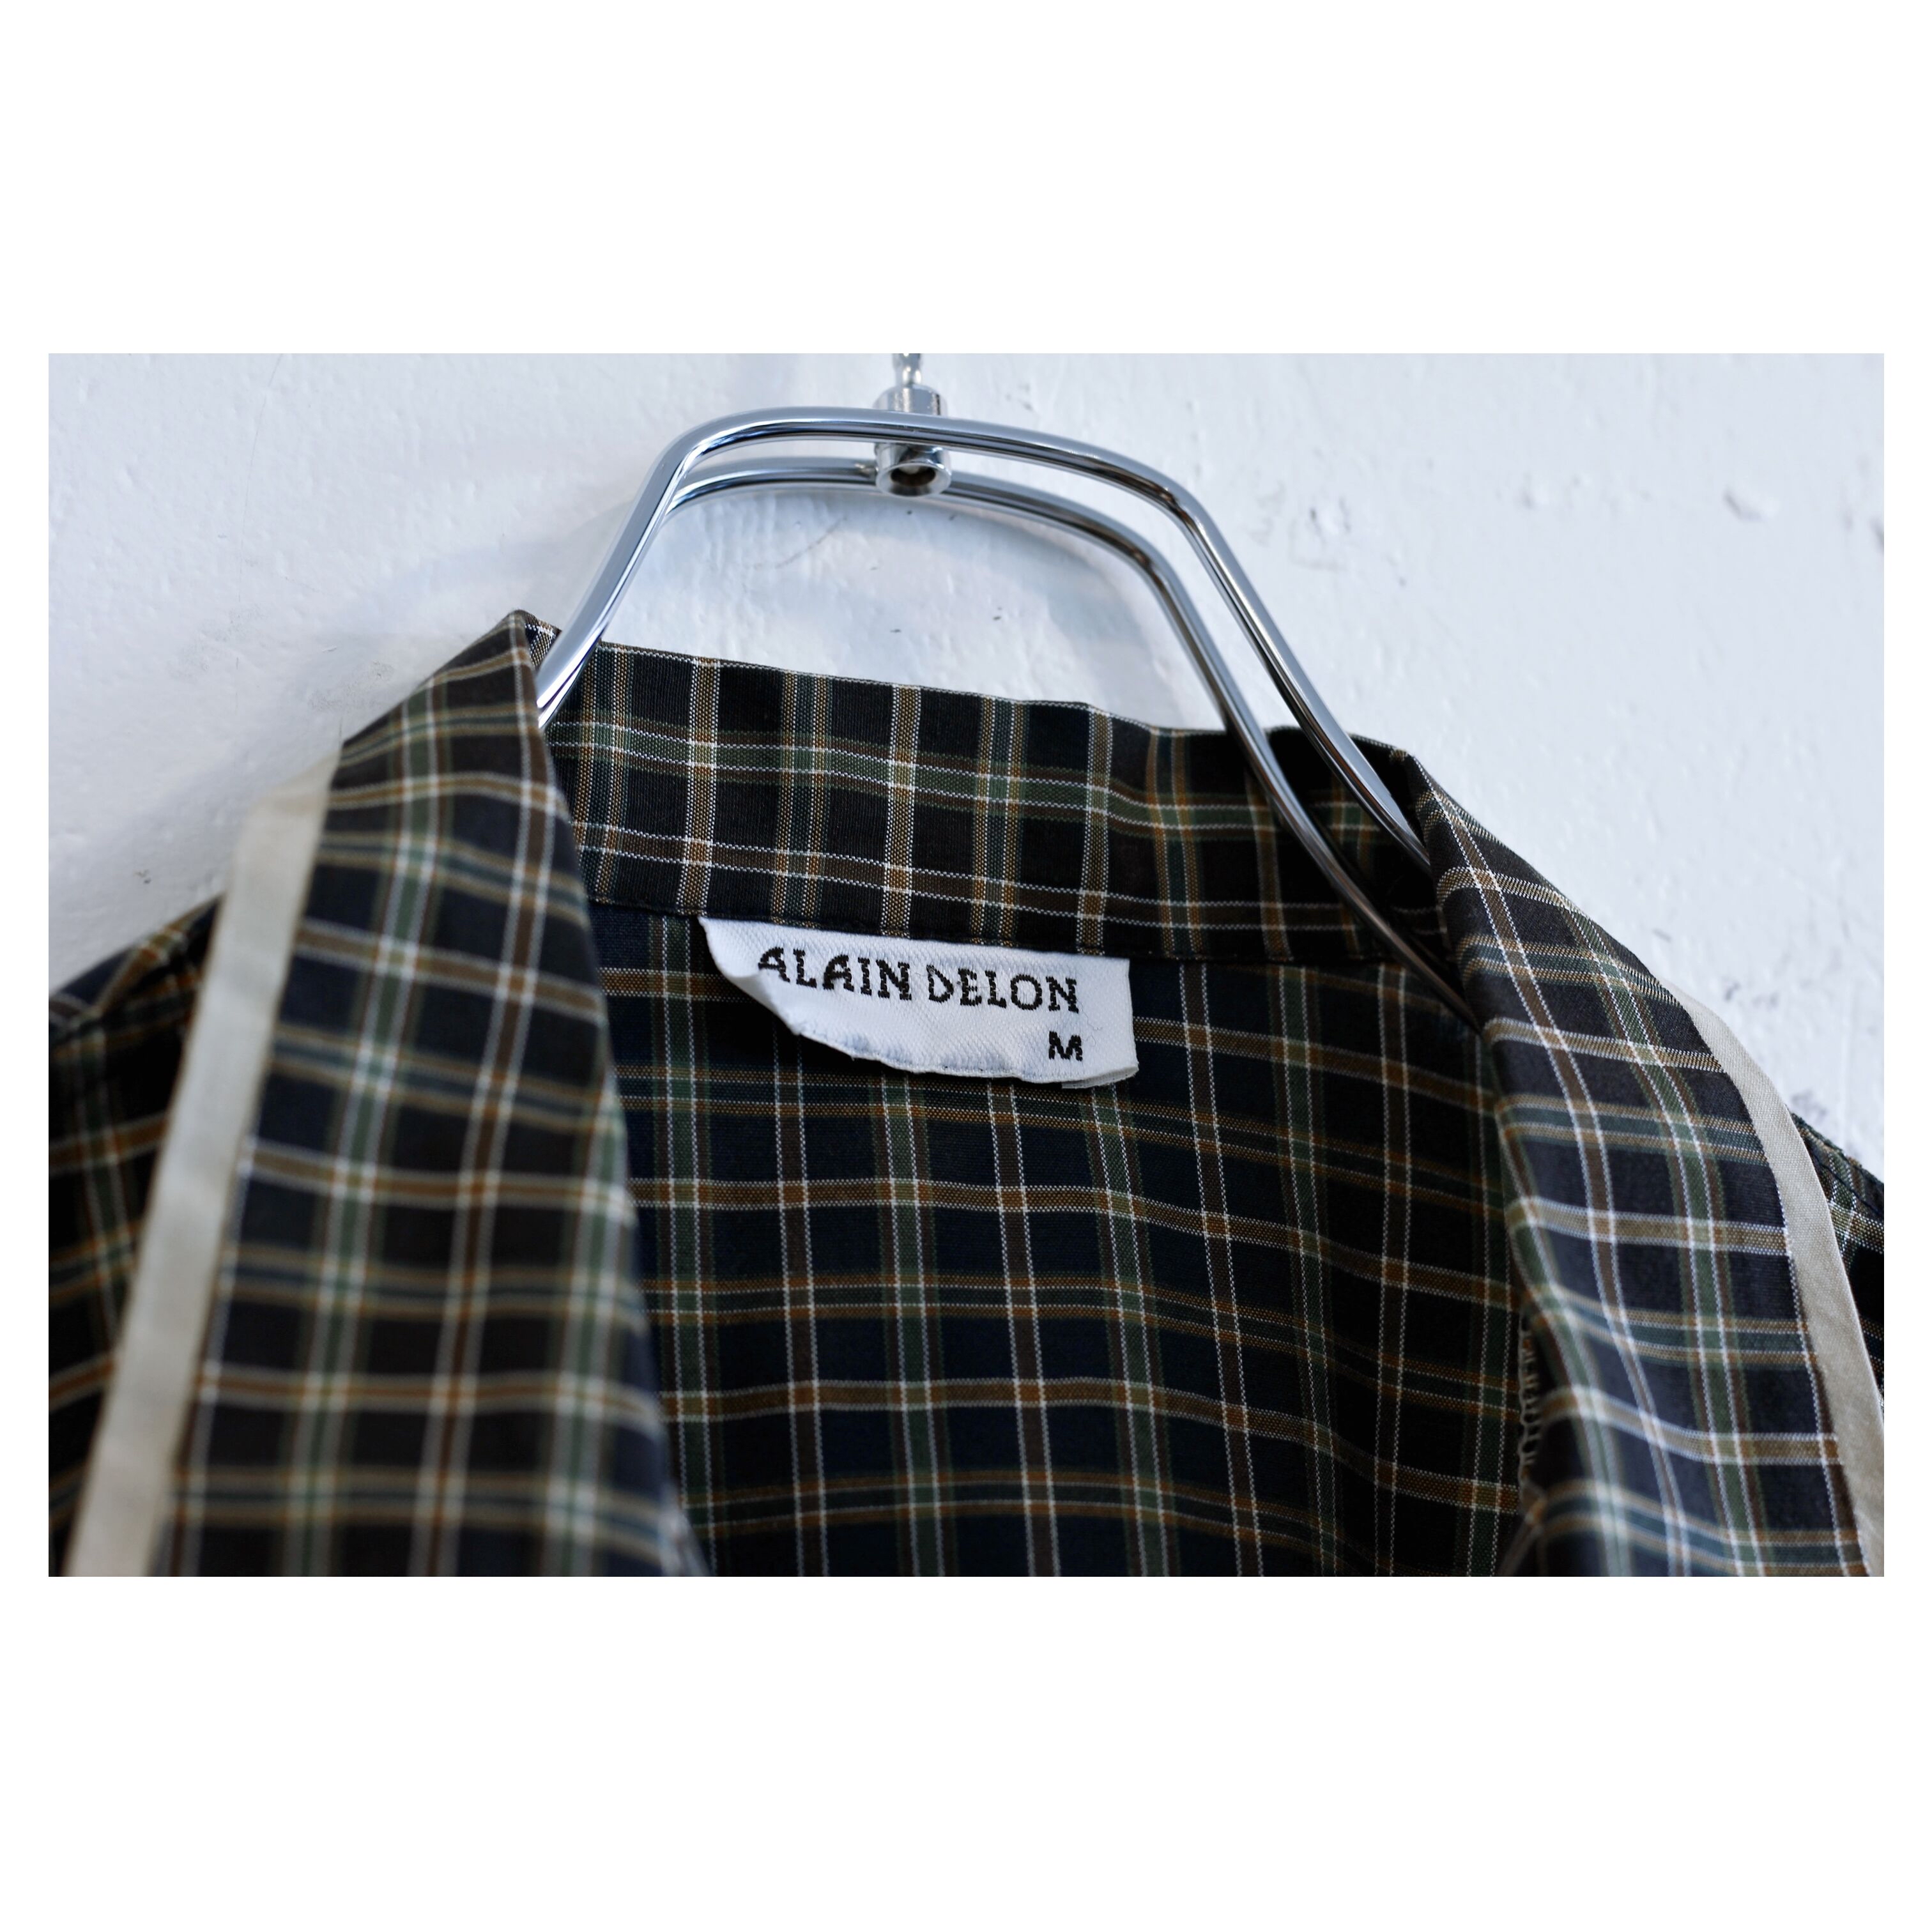 Old Plaid Relax Shirt